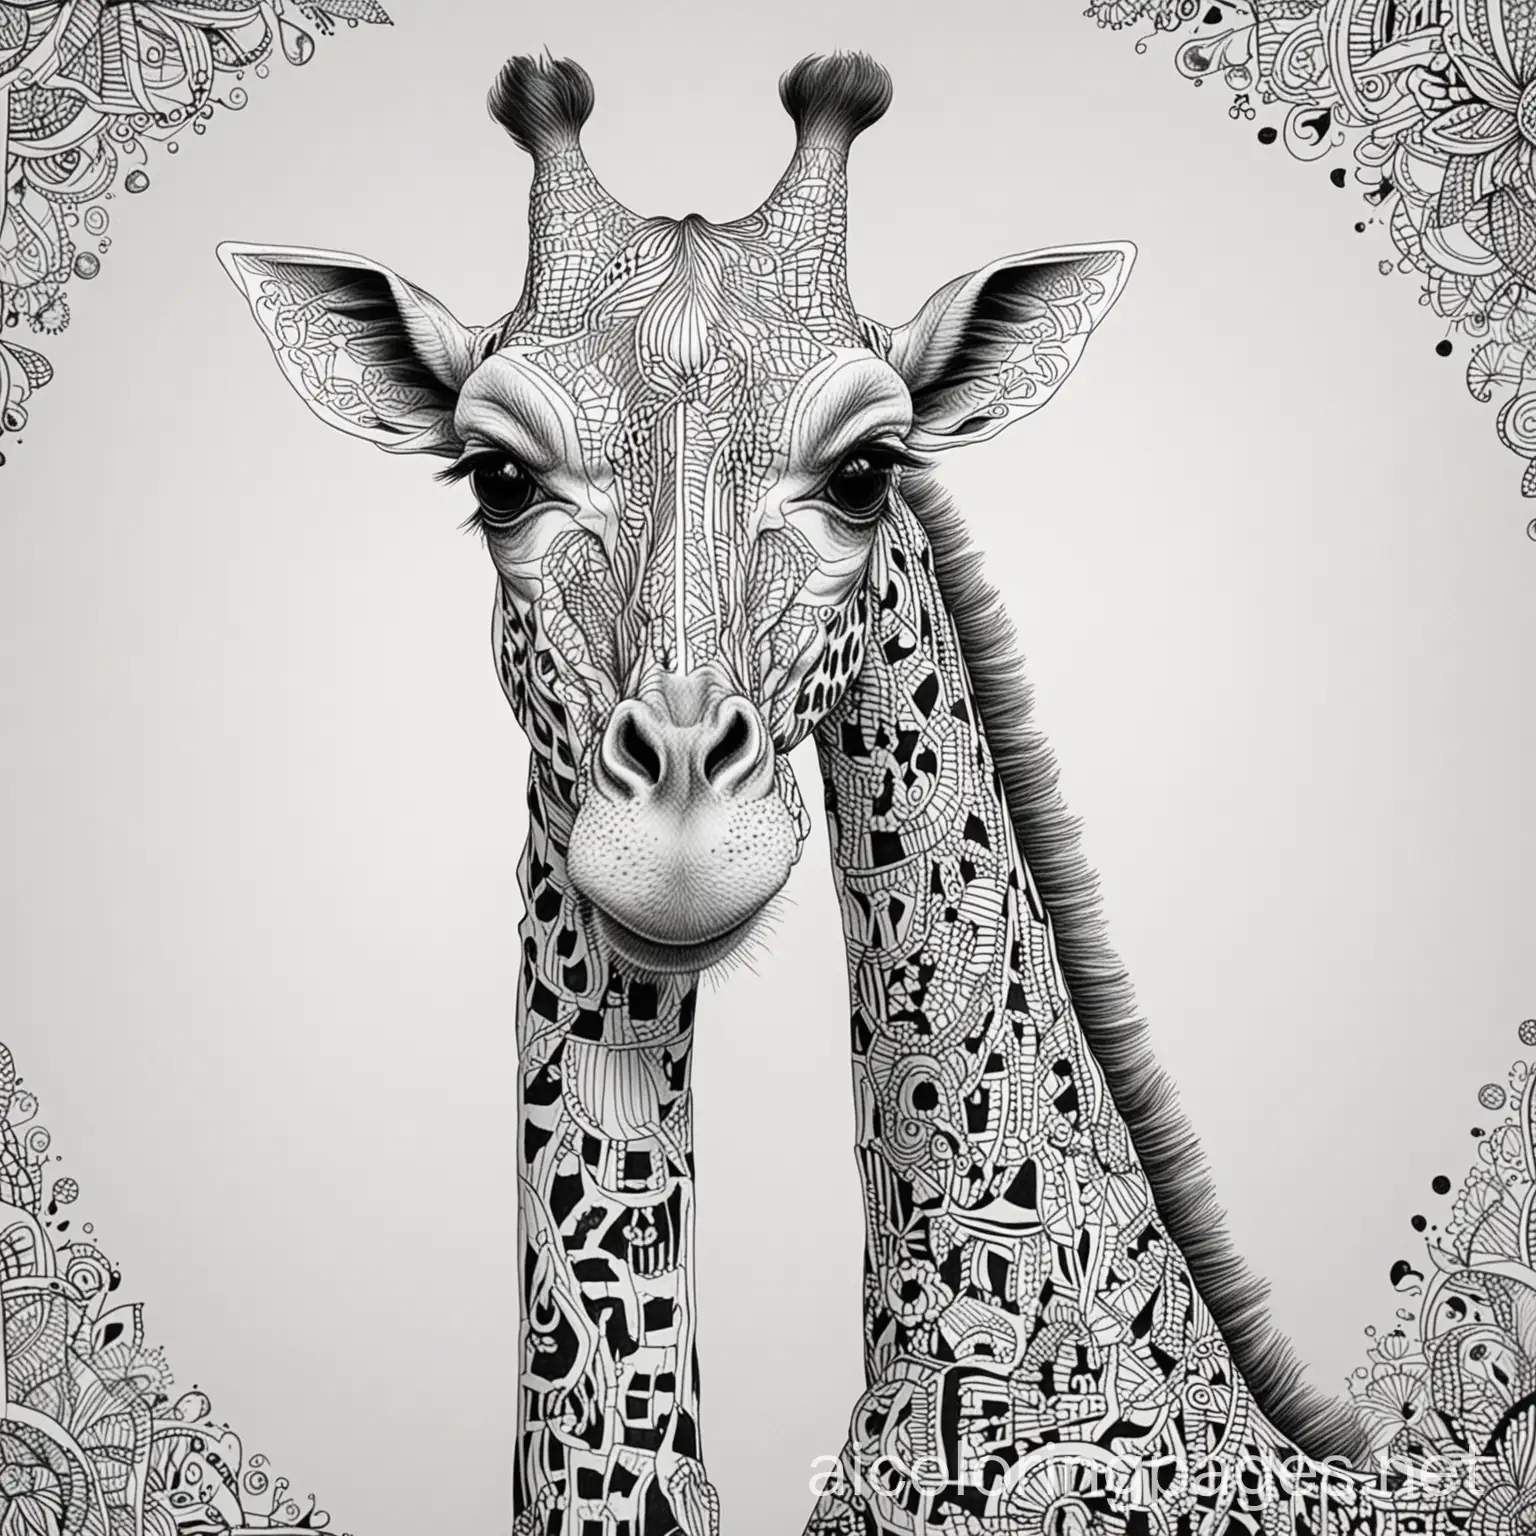 Giraffe-Zentangle-Coloring-Page-Intricate-Line-Art-for-Relaxing-Creativity